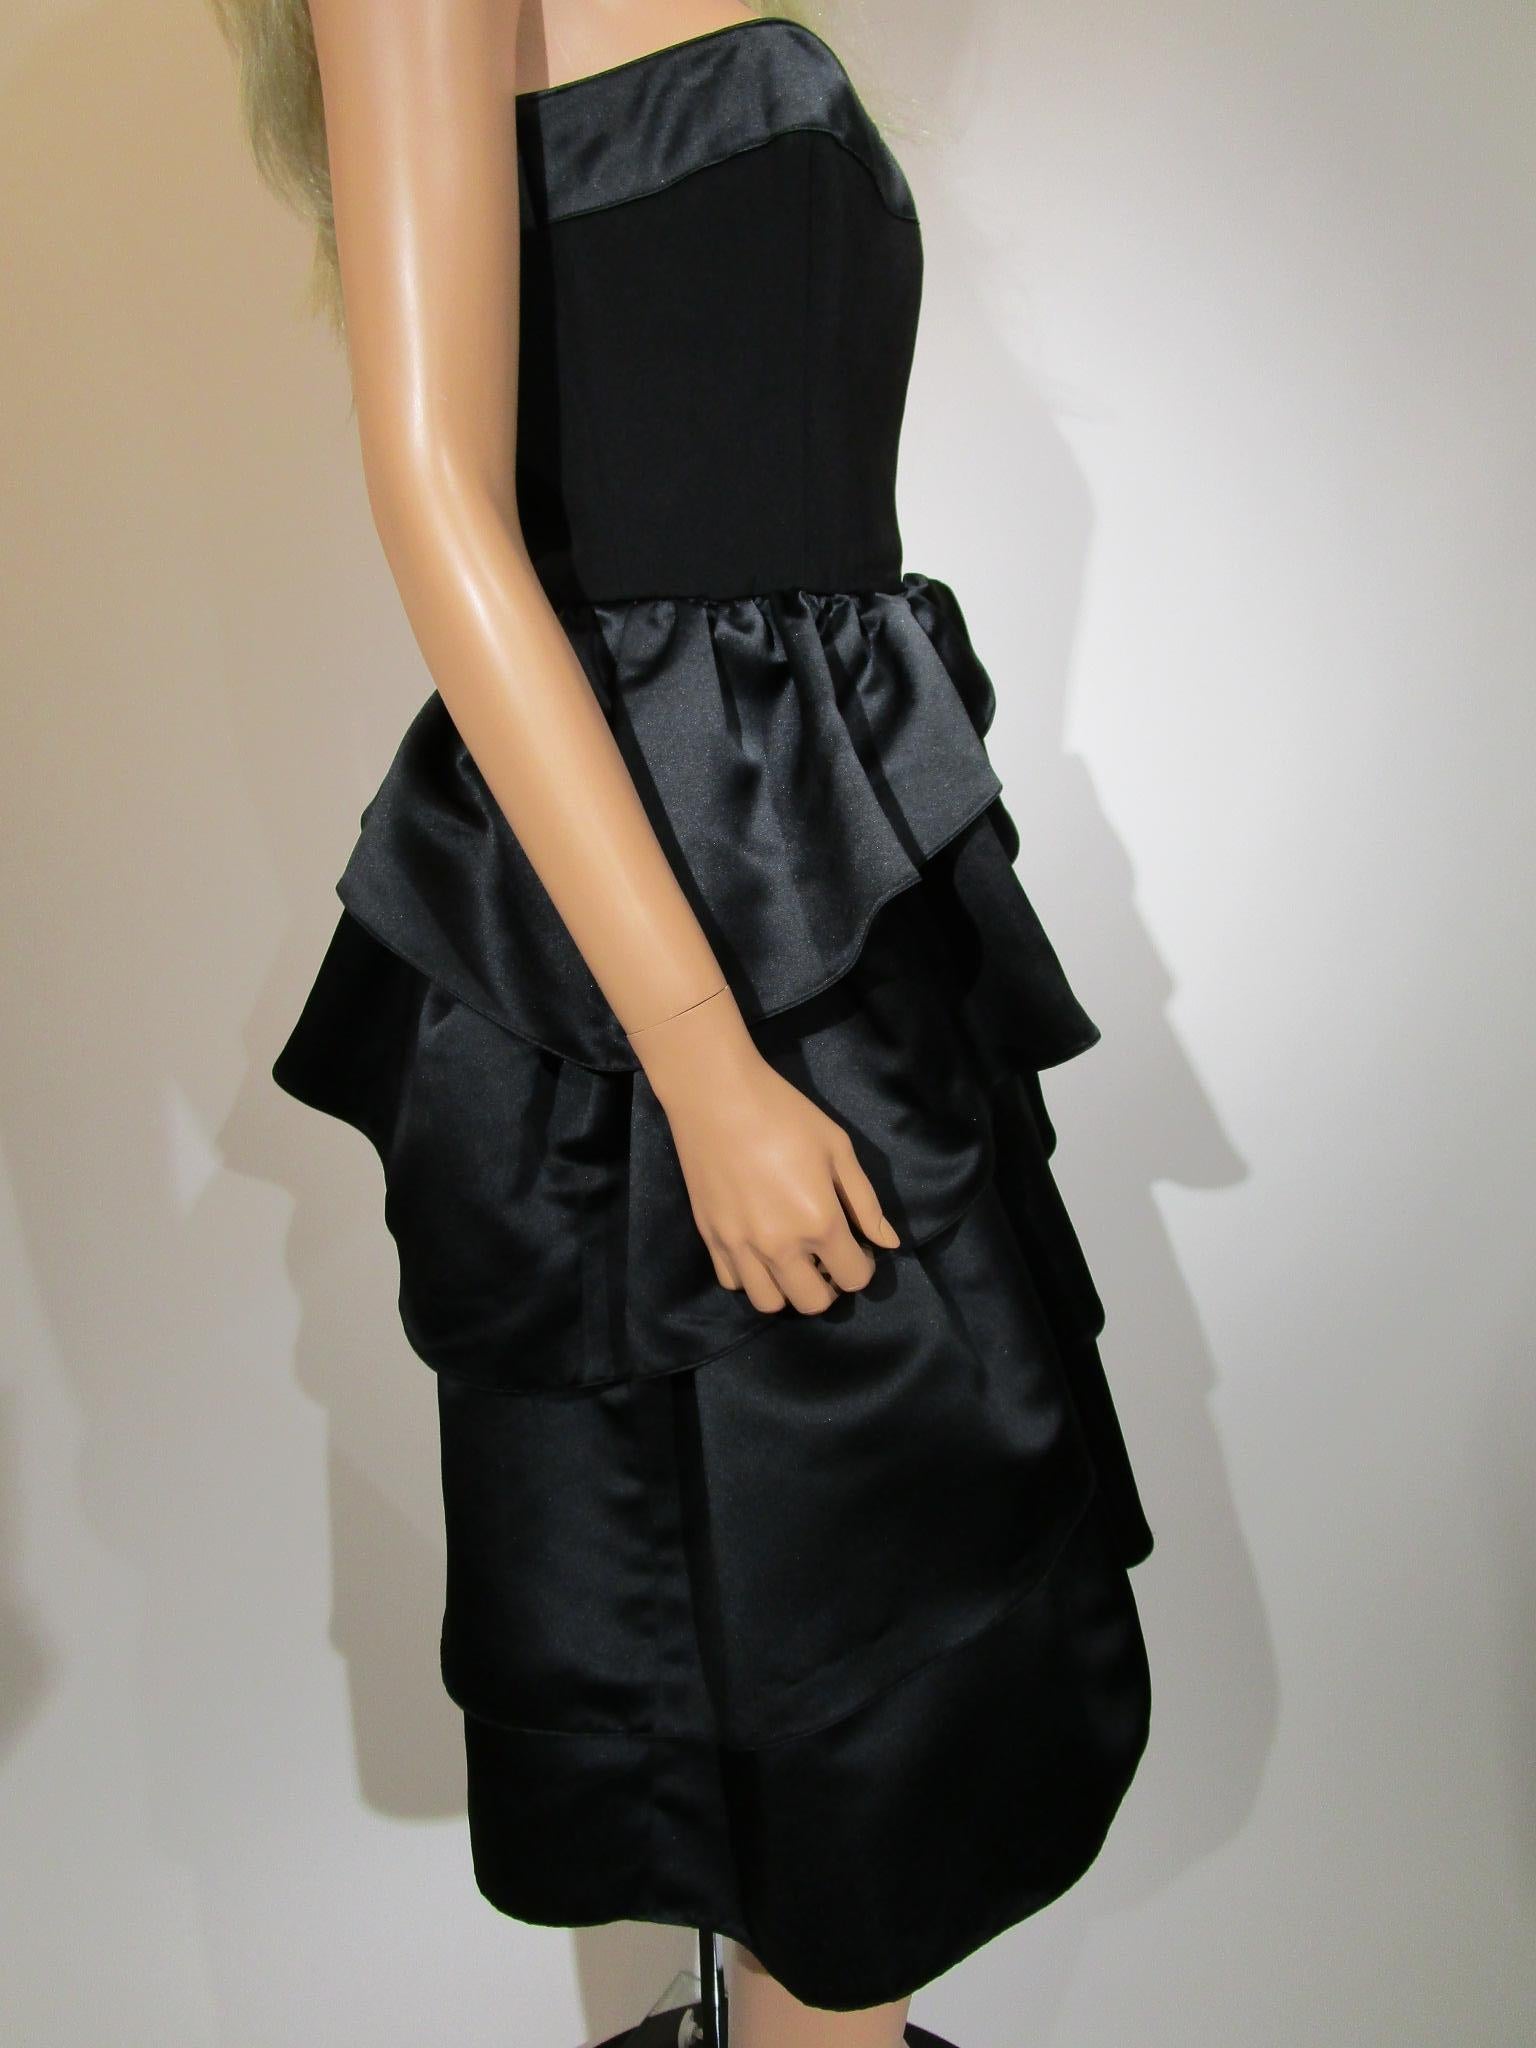 Gorgeous Louis Feraud strapless black dress with elegant, tiered ruffles (5 tiers) ending in a straight skirt.  Bodice lining has a boned construction and zips up the side.

Dress is in excellent condition with no stains, rips or holes.
Marked